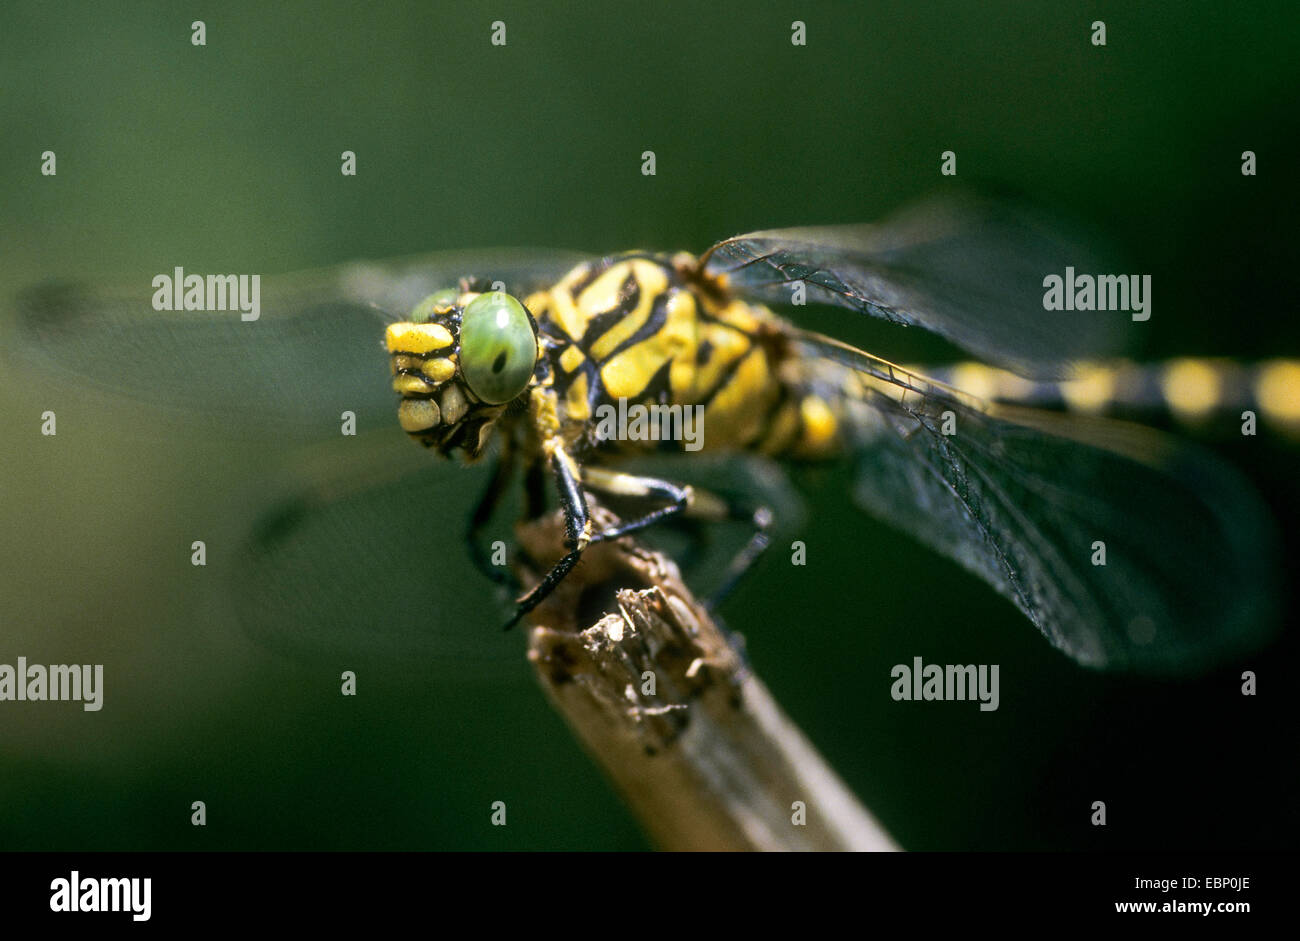 Green-eyed hook-tailed dragonfly, Small Pincertail (Onychogomphus forcipatus), male, Germany Stock Photo